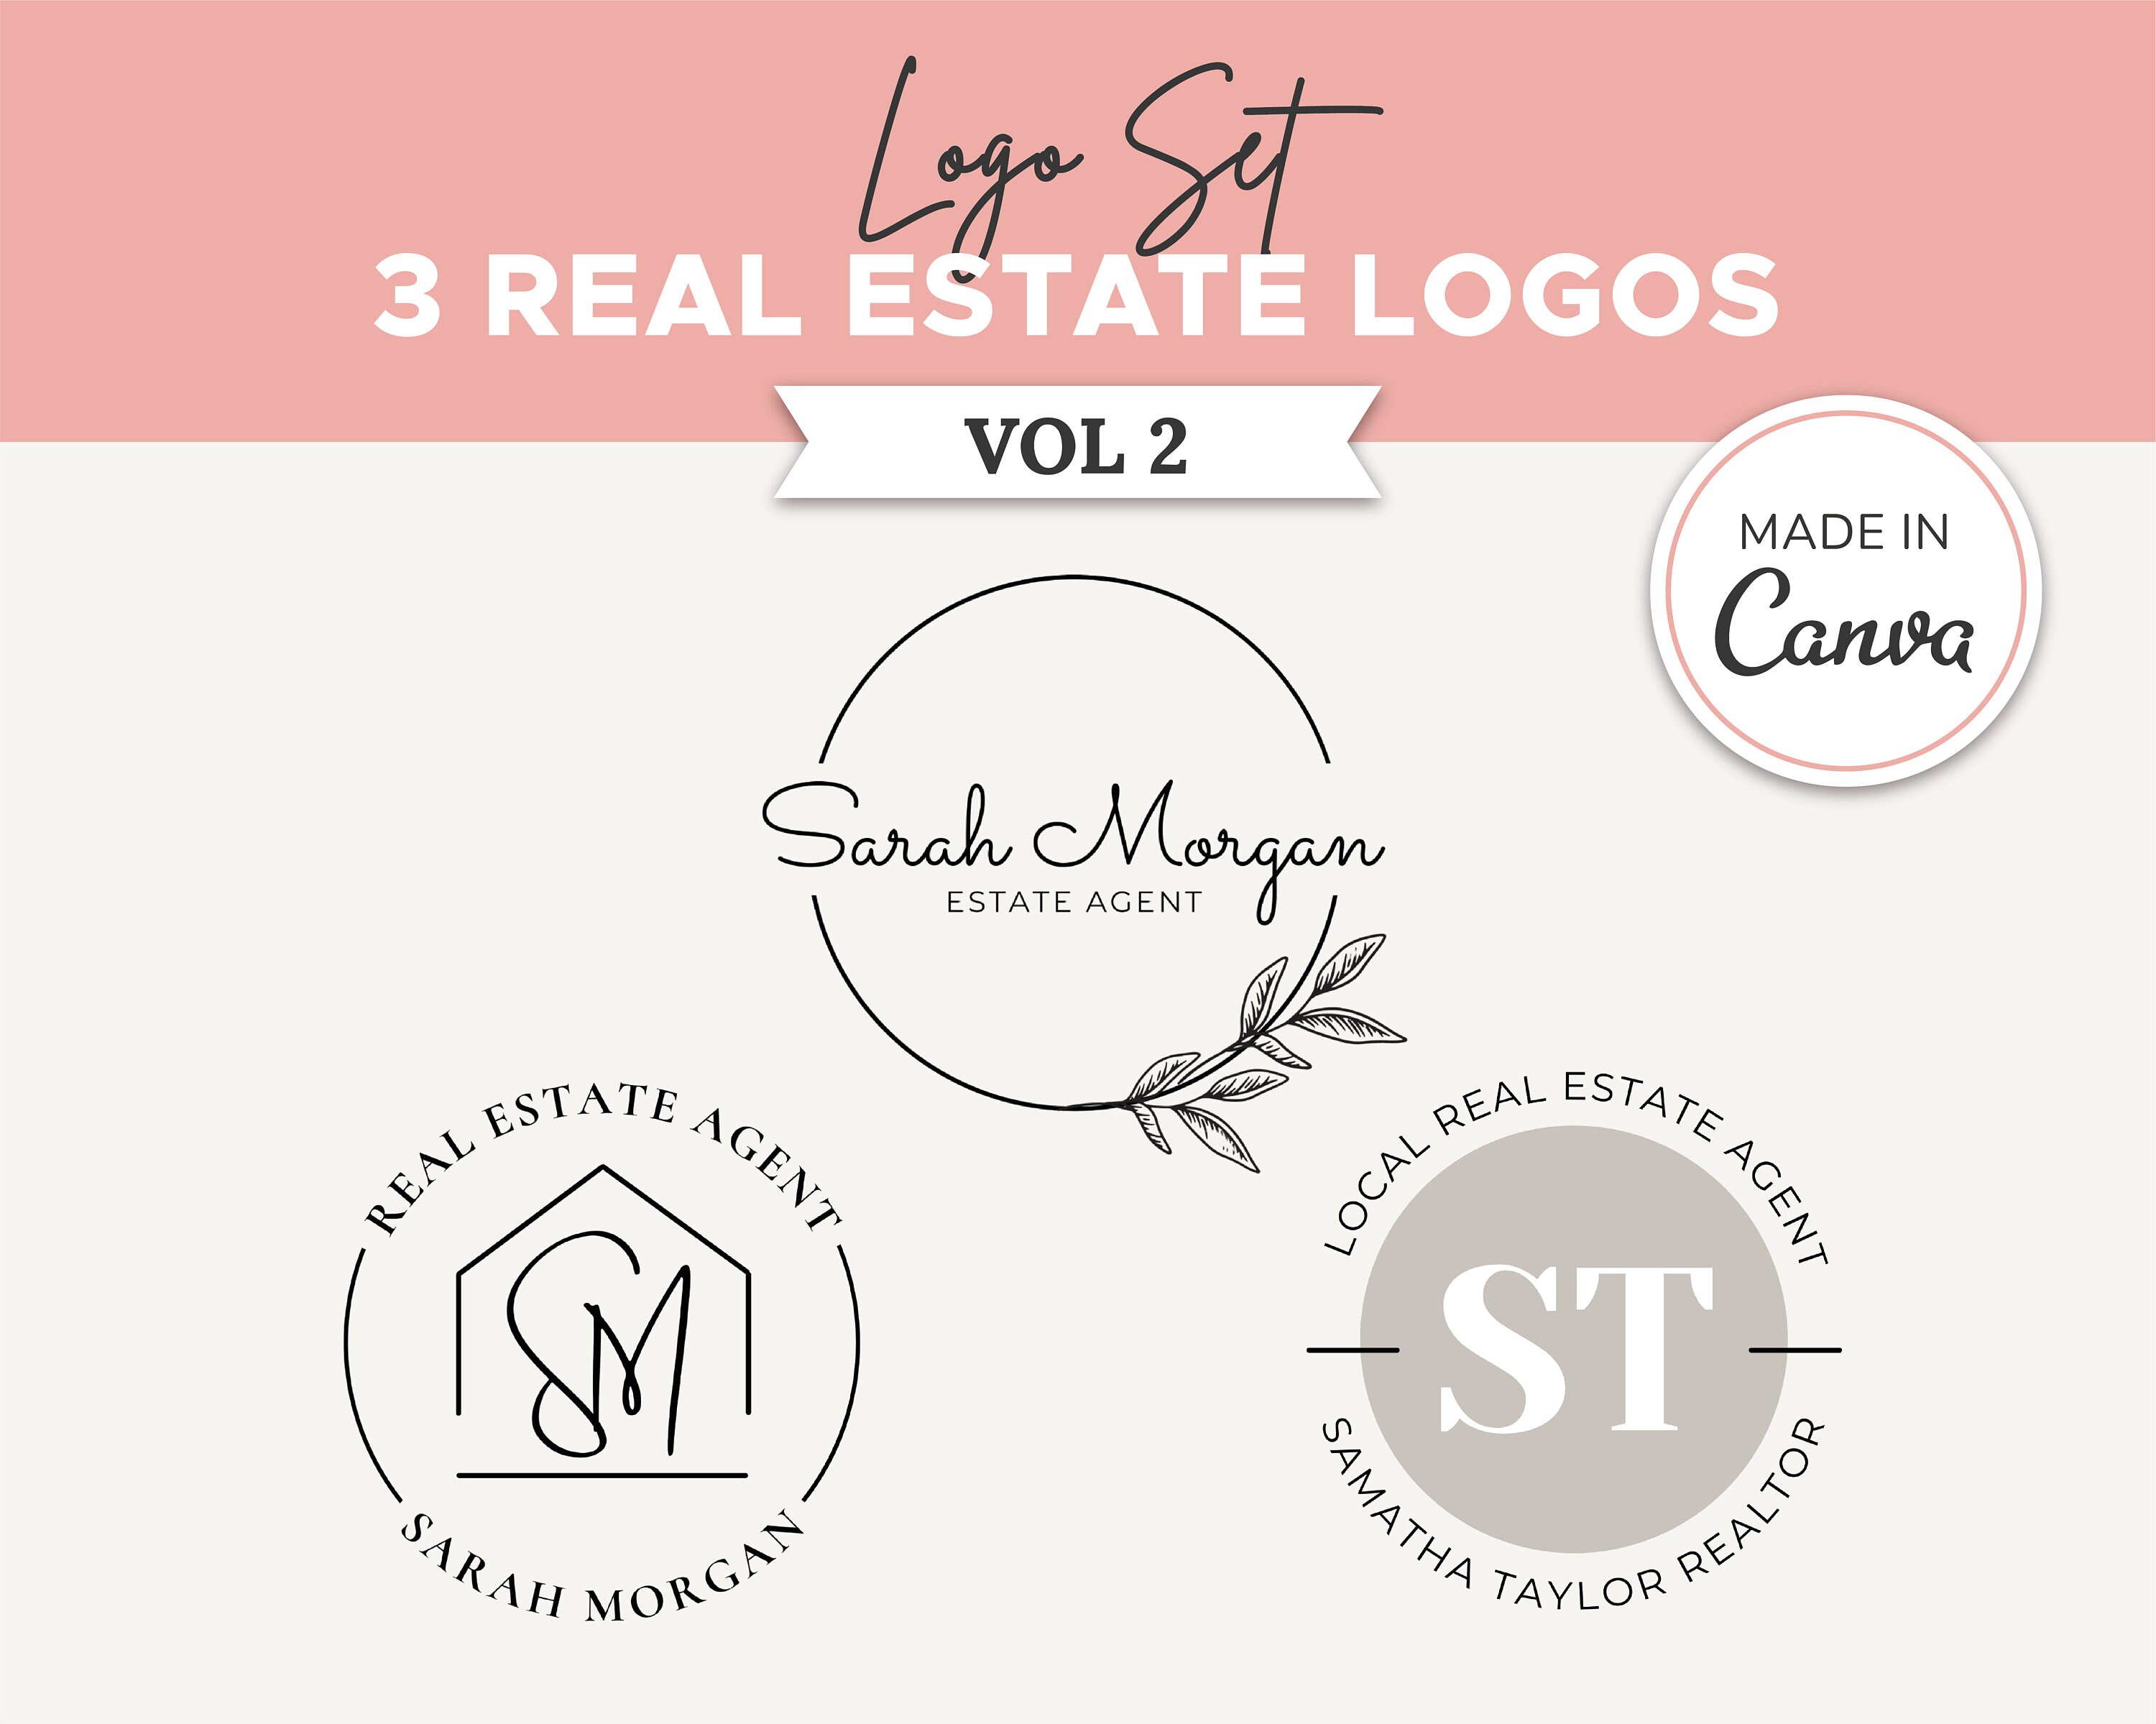 Free and customizable real estate logo templates